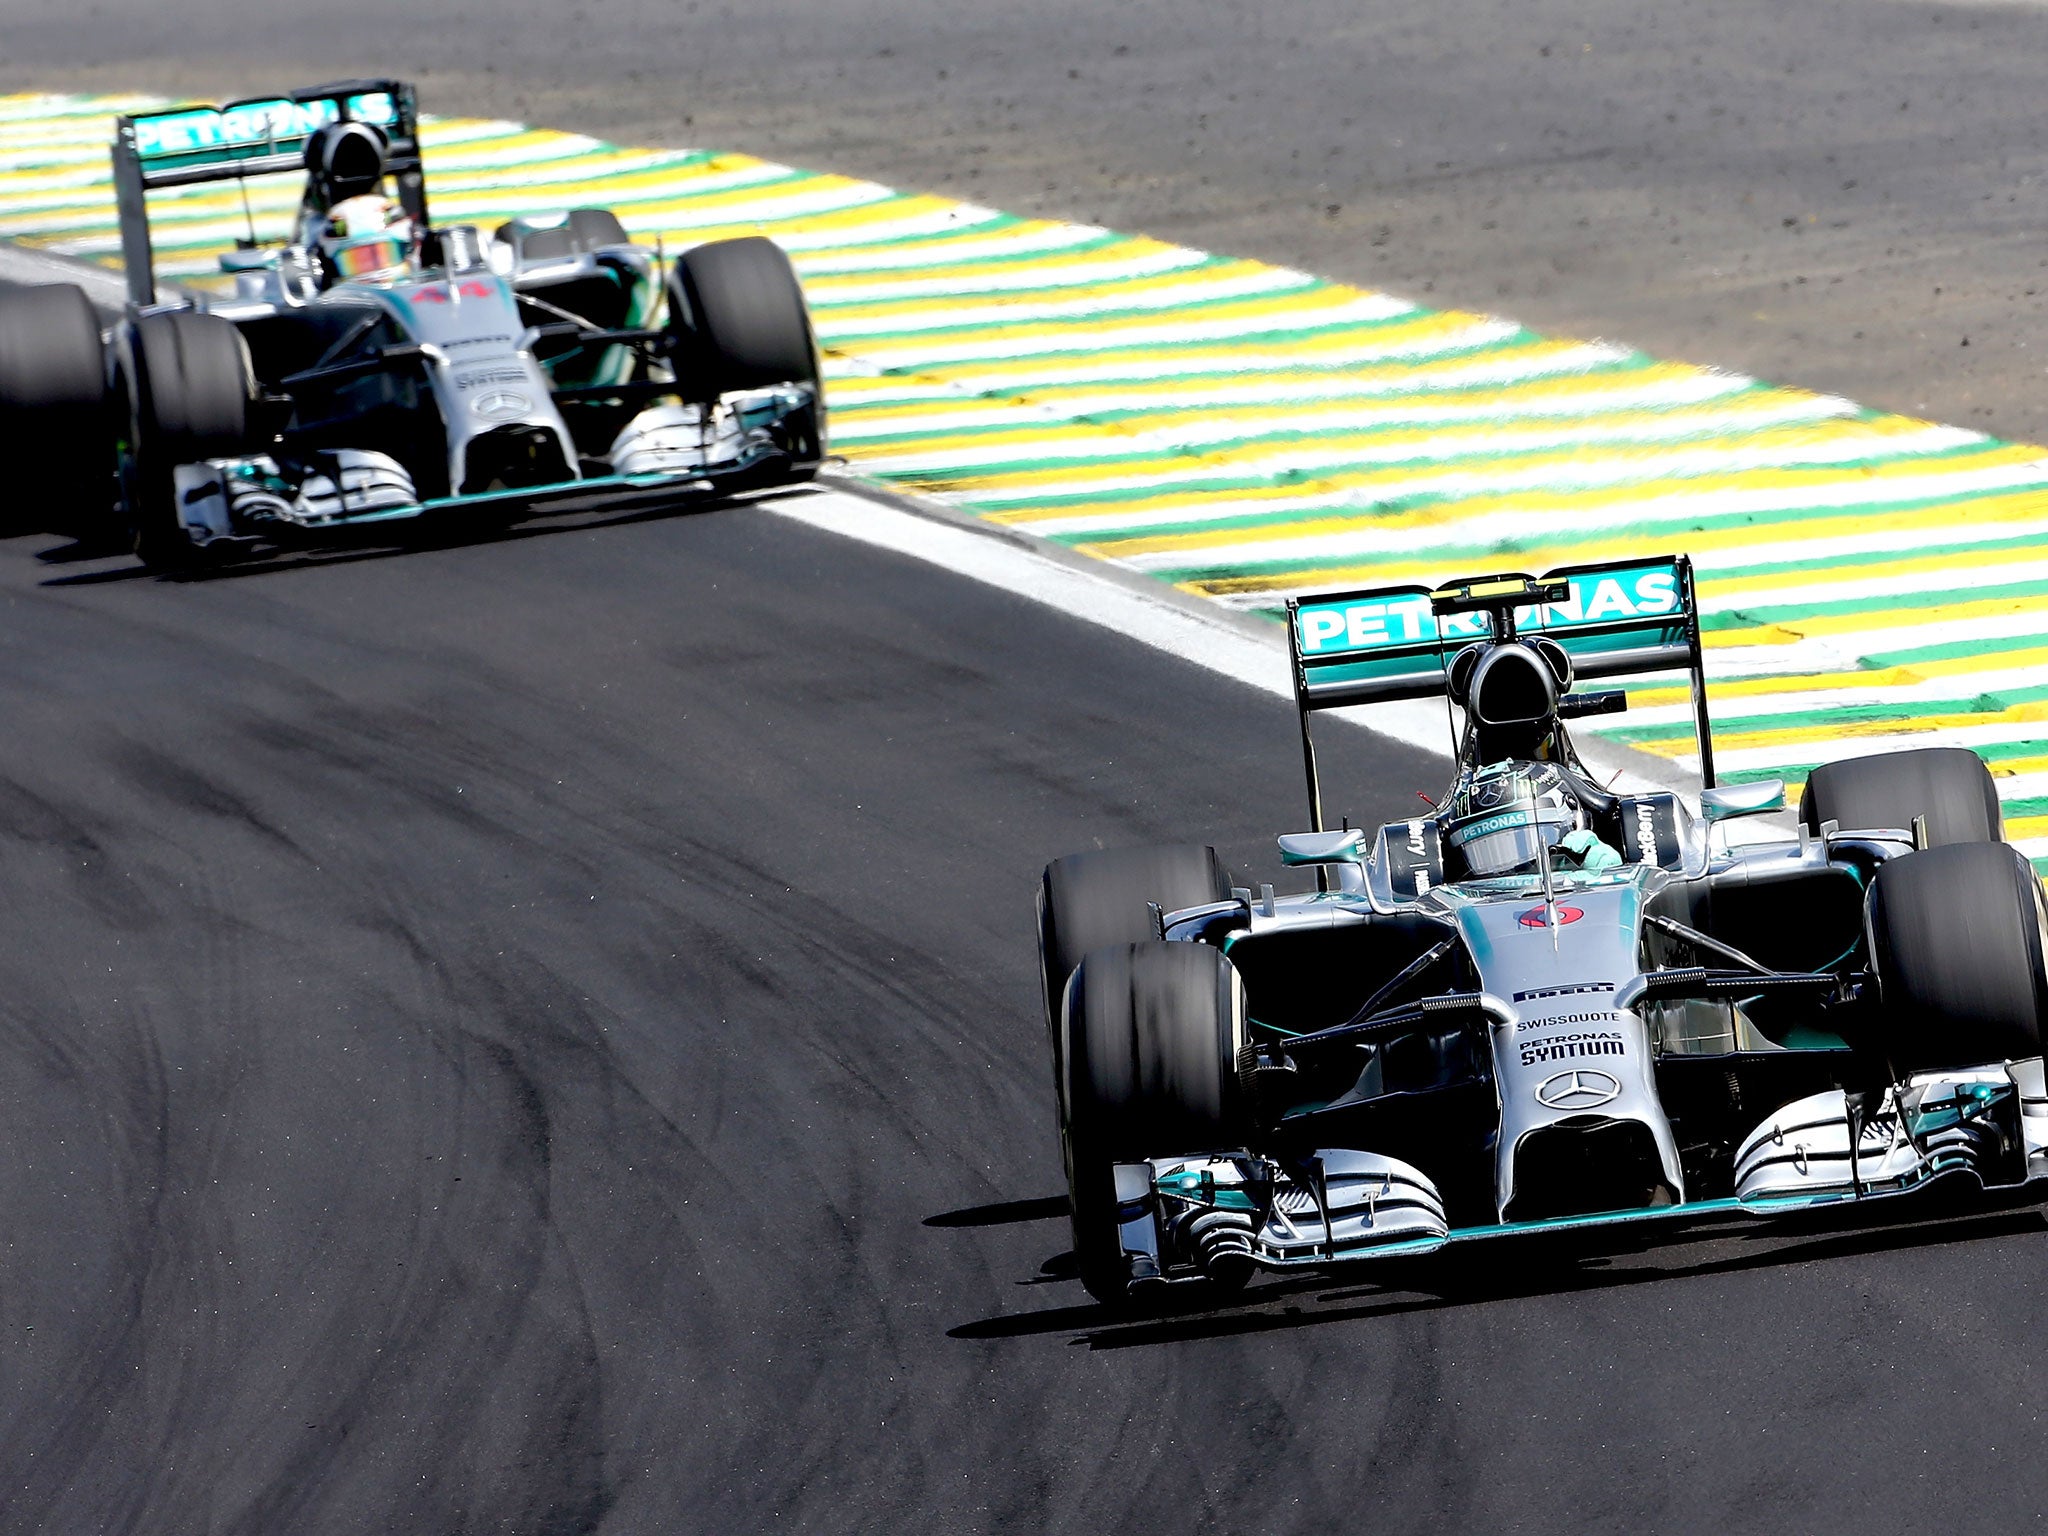 Nico Rosberg and Lewis Hamilton will battle for the title on Sunday